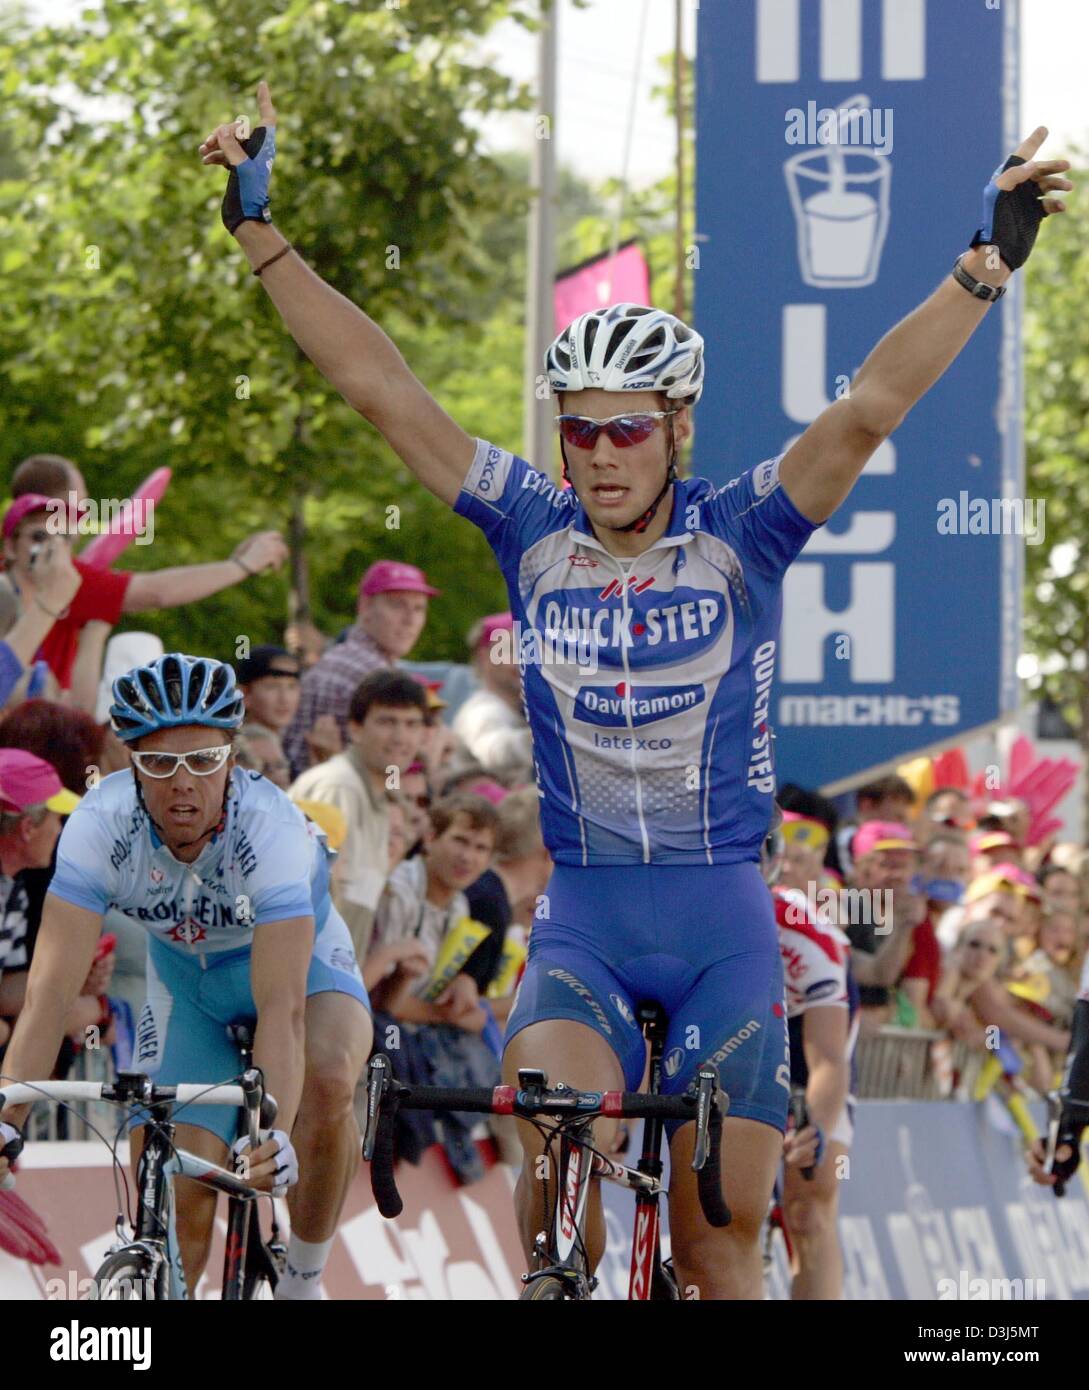 (dpa) - Belgian cycling pro Tom Boonen (R) of Team Quick-Step Davitamon raises his arms and cheers after winning the seventh and final leg of the Tour of Germany cycling race in Leipzig, Germany, 6 June 2004. Boonen won ahead of Danilo Hondo (L) of Team Gerolsteiner. Stock Photo